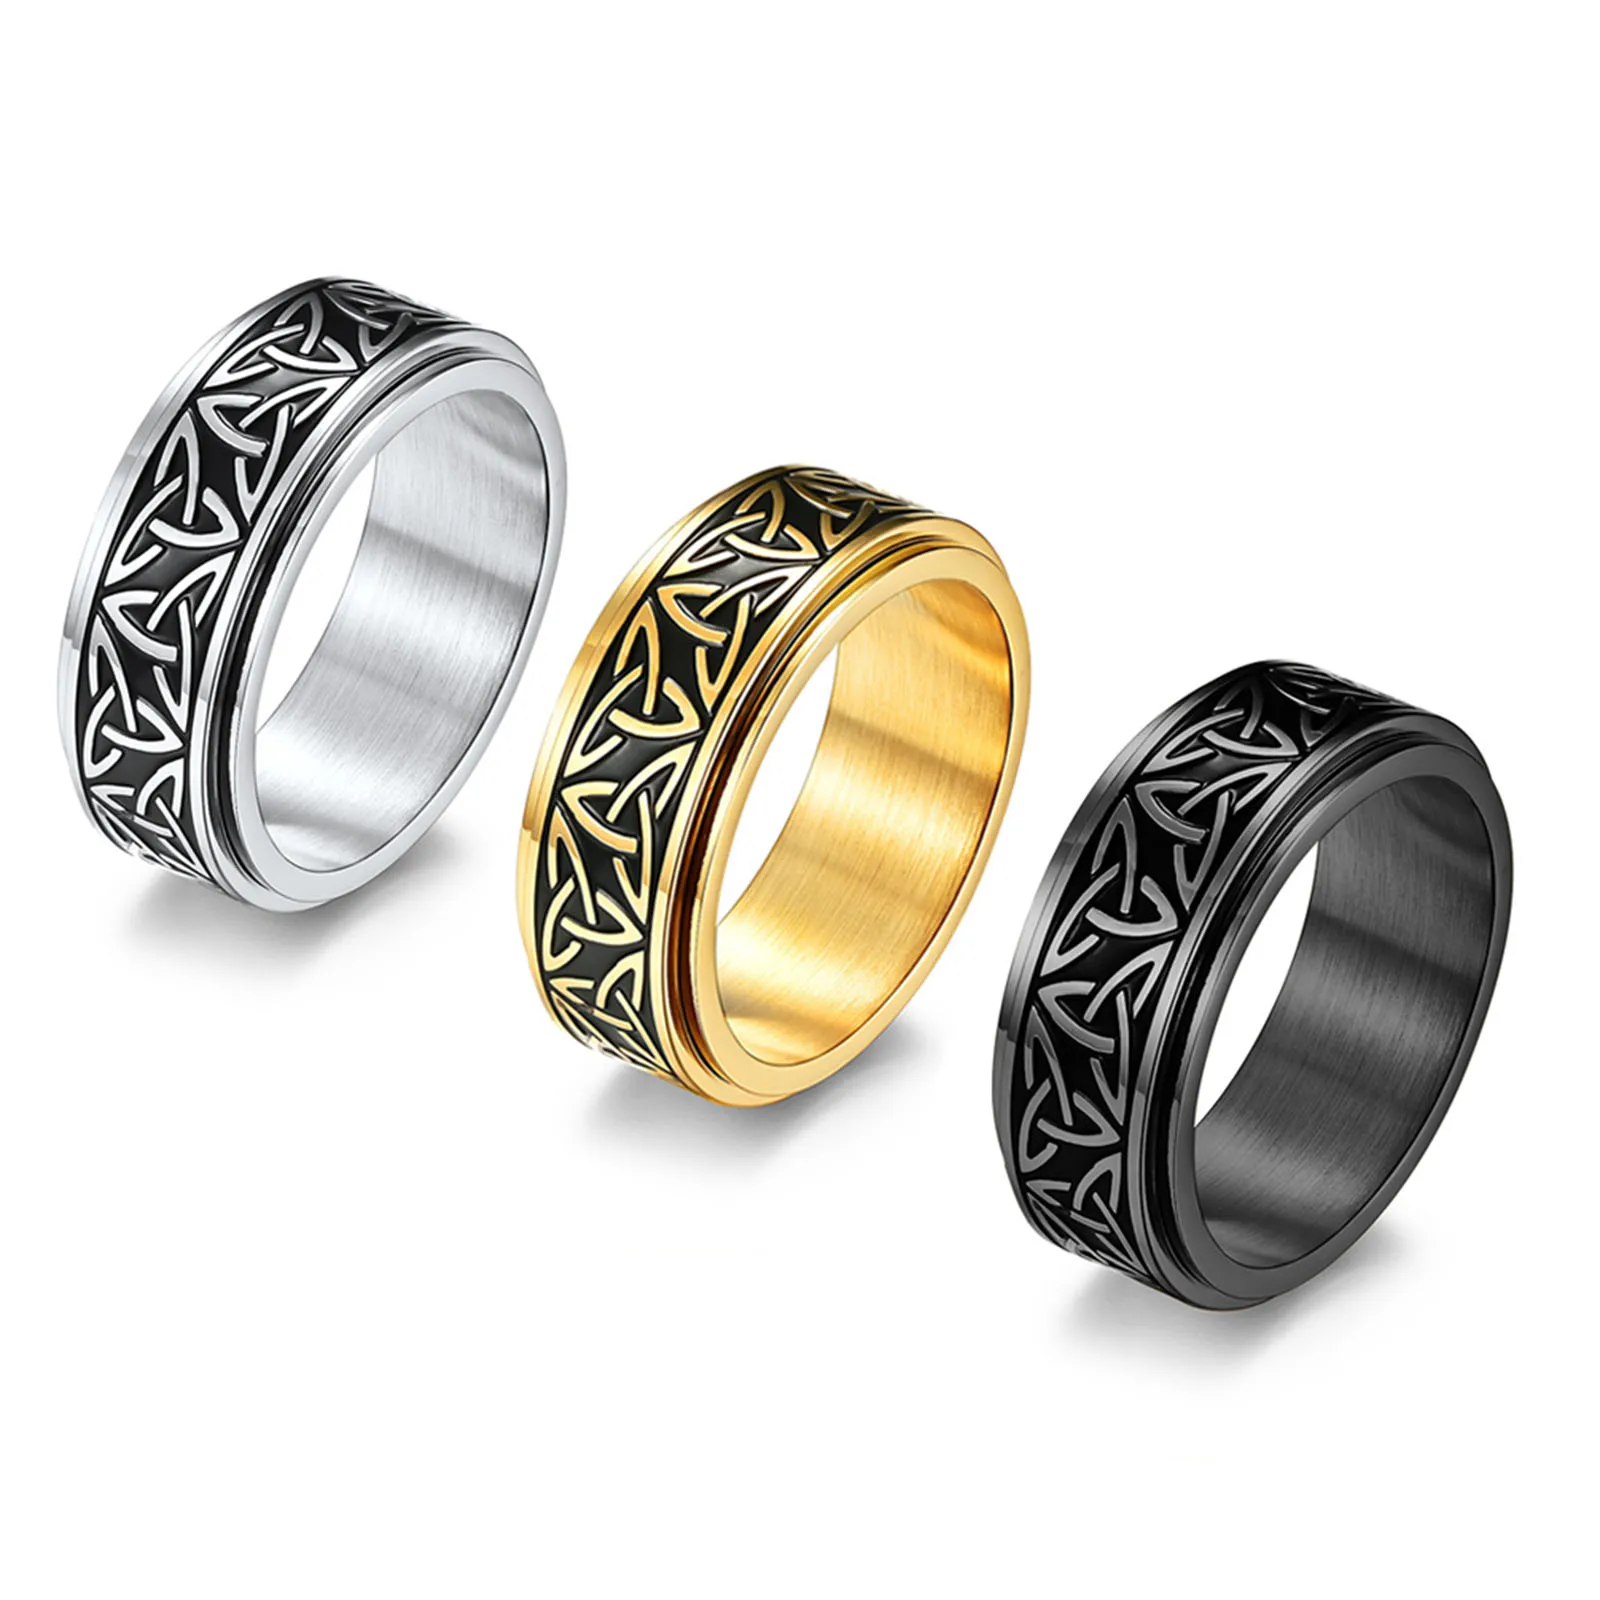 

Vintage Stainless Steel Unadjustable Rings Multicolor Circle Ring Celtic Knot Rotatable Women Men Rings Punk Style Party Jewelry